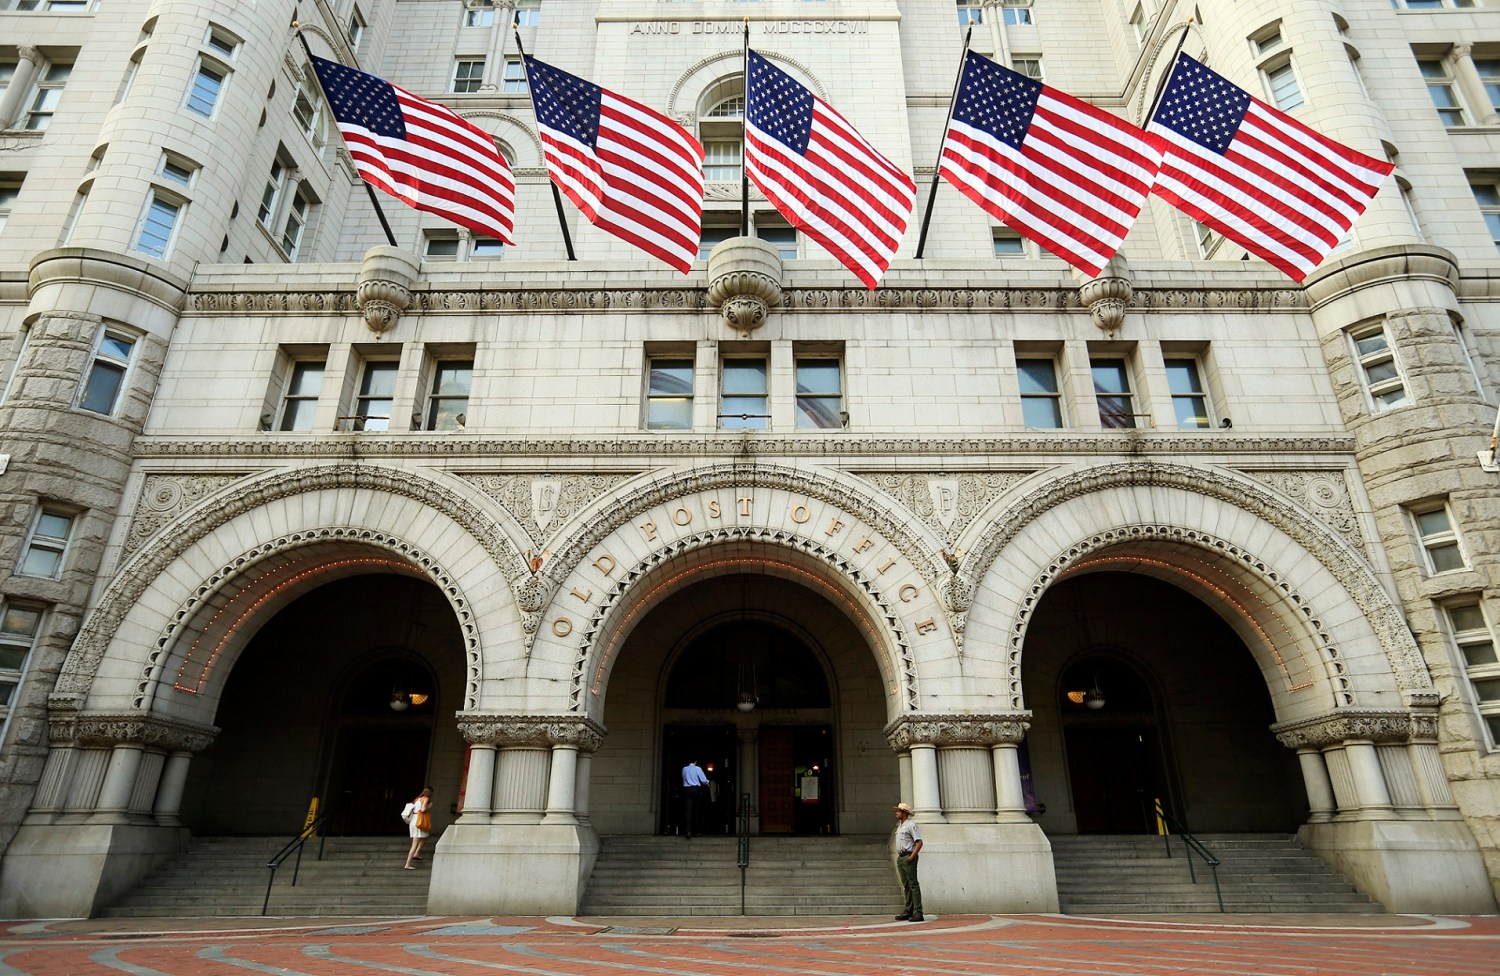 U.S. flags fly on the Old Post Office in Washington September 10, 2013. U.S. real-estate mogul Donald Trump unveiled on Tuesday a $200 million redevelopment plan of the iconic building by the Trump Organization, into a luxury hotel, according to news reports. REUTERS/Kevin Lamarque (UNITED STATES - Tags: BUSINESS SOCIETY WEALTH TRAVEL REAL ESTATE) - GM1E99A1S1O01